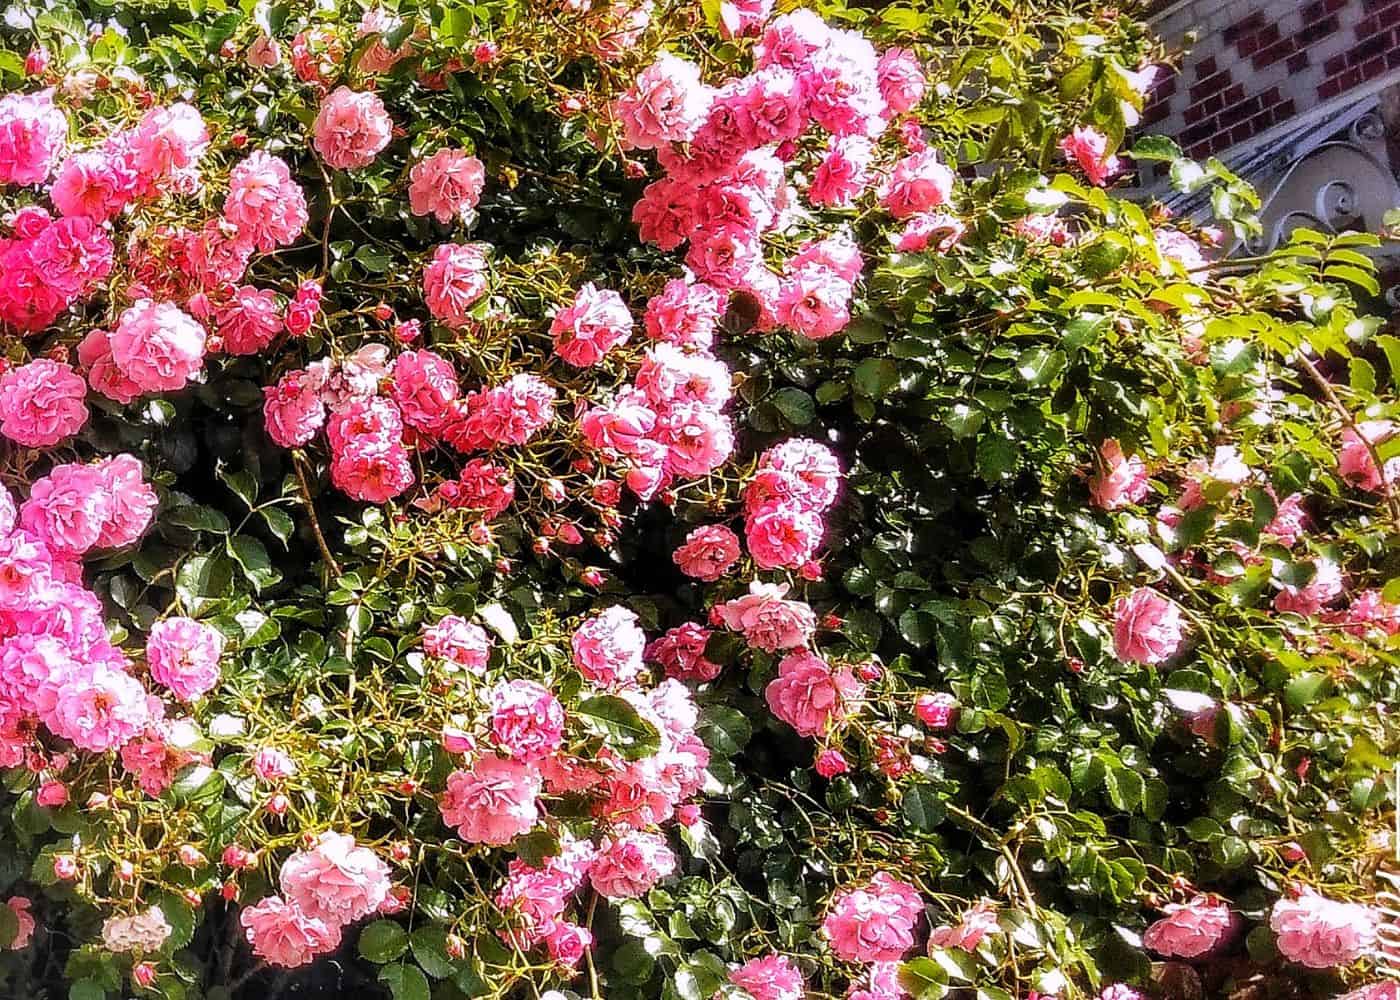 Hedge of pink roses